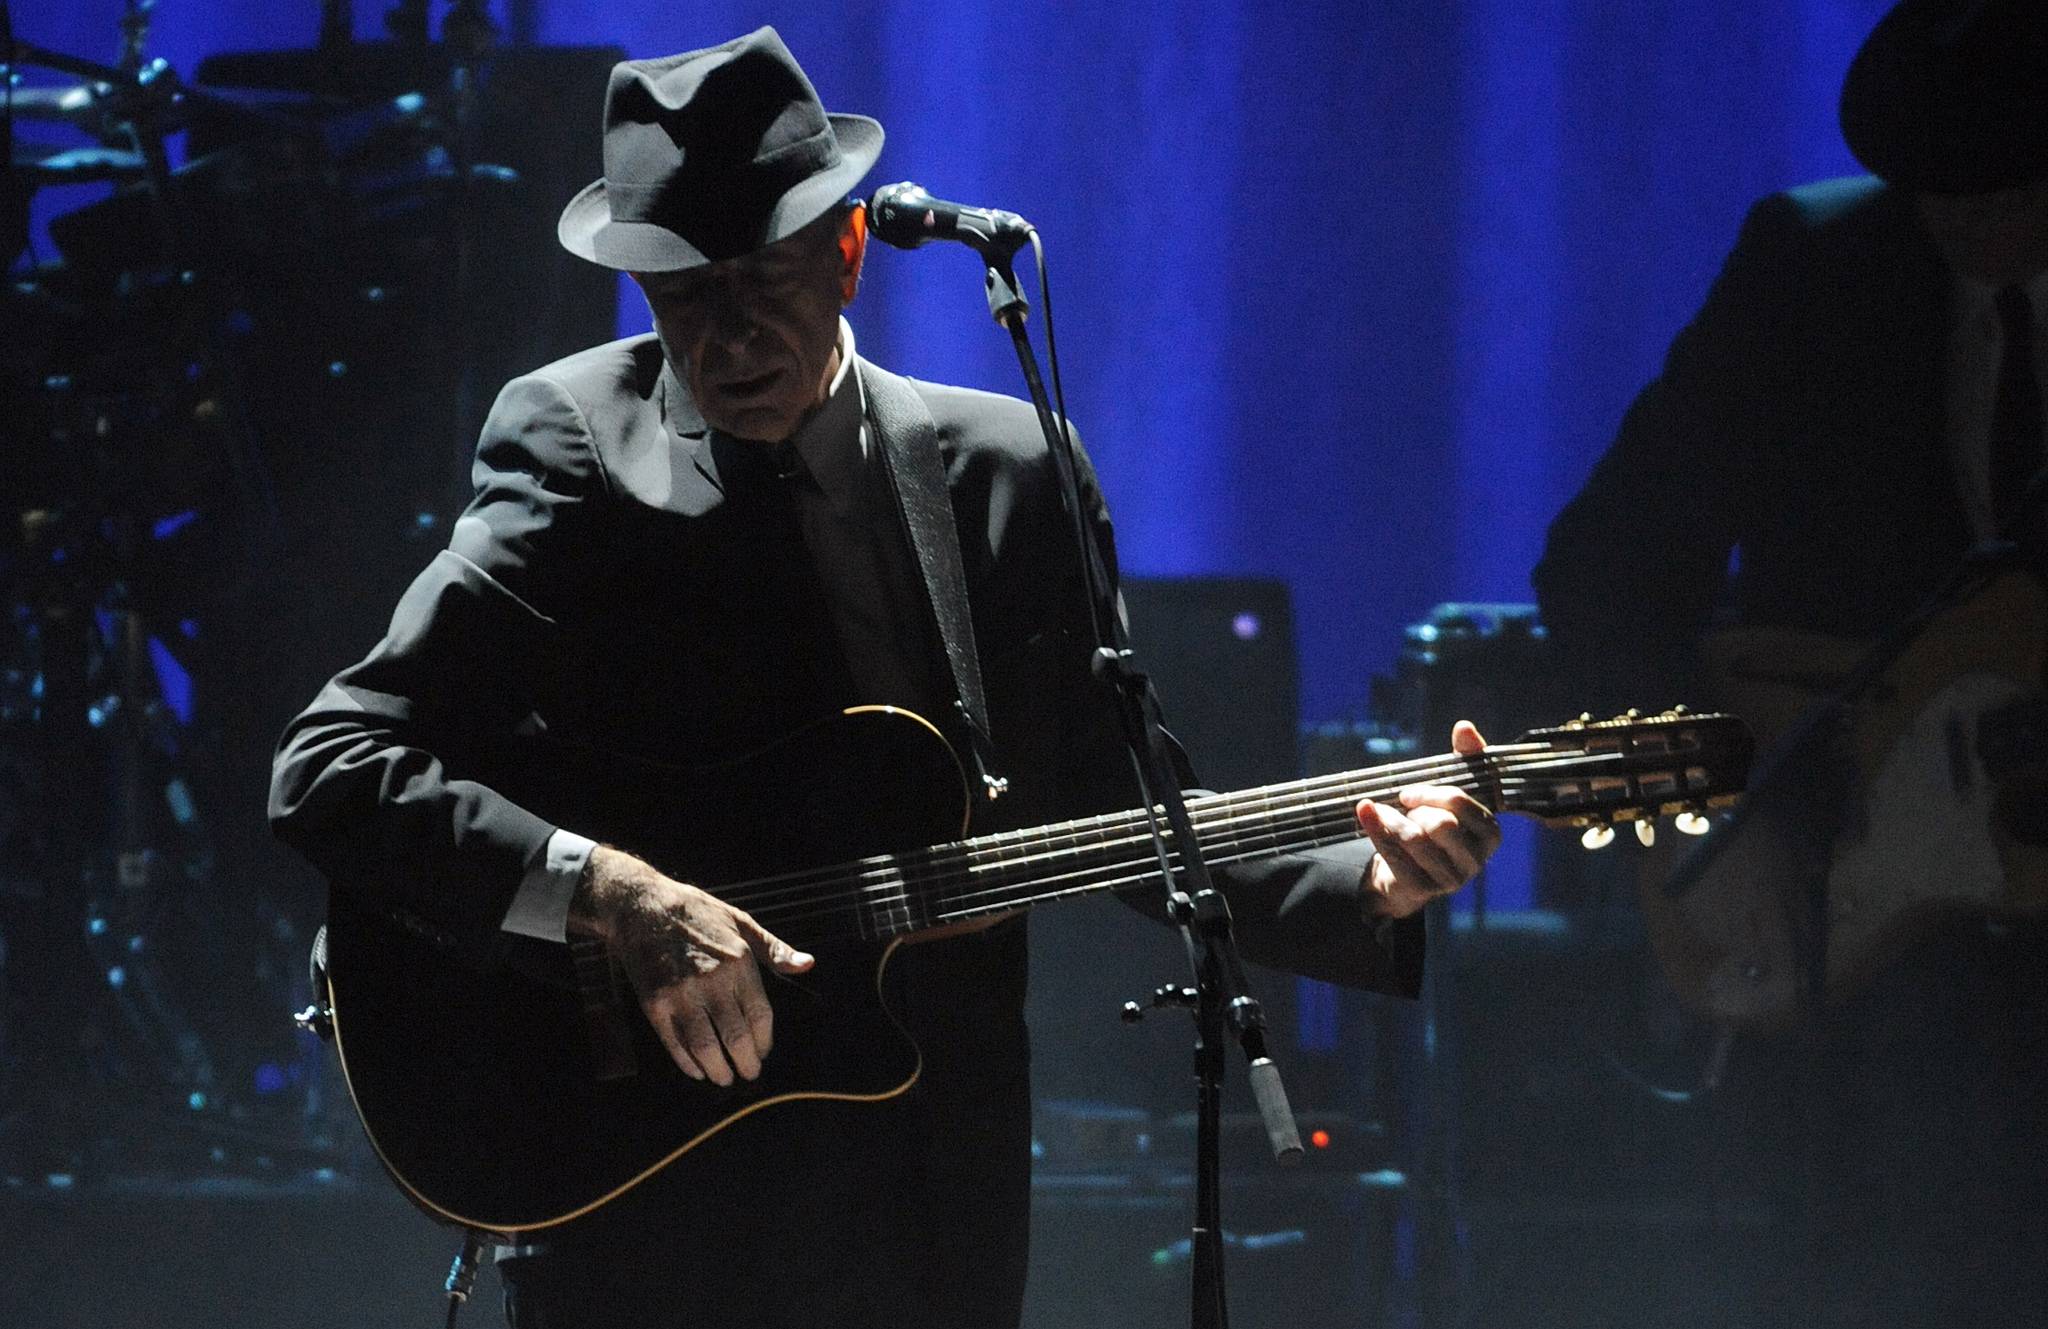 Leonard Cohen performs at the Beacon Theatre, his first concert in New York in 15 years, Thursday, Feb. 19, 2009. (AP Photo/Henny Ray Abrams) ORG XMIT: NYHA107